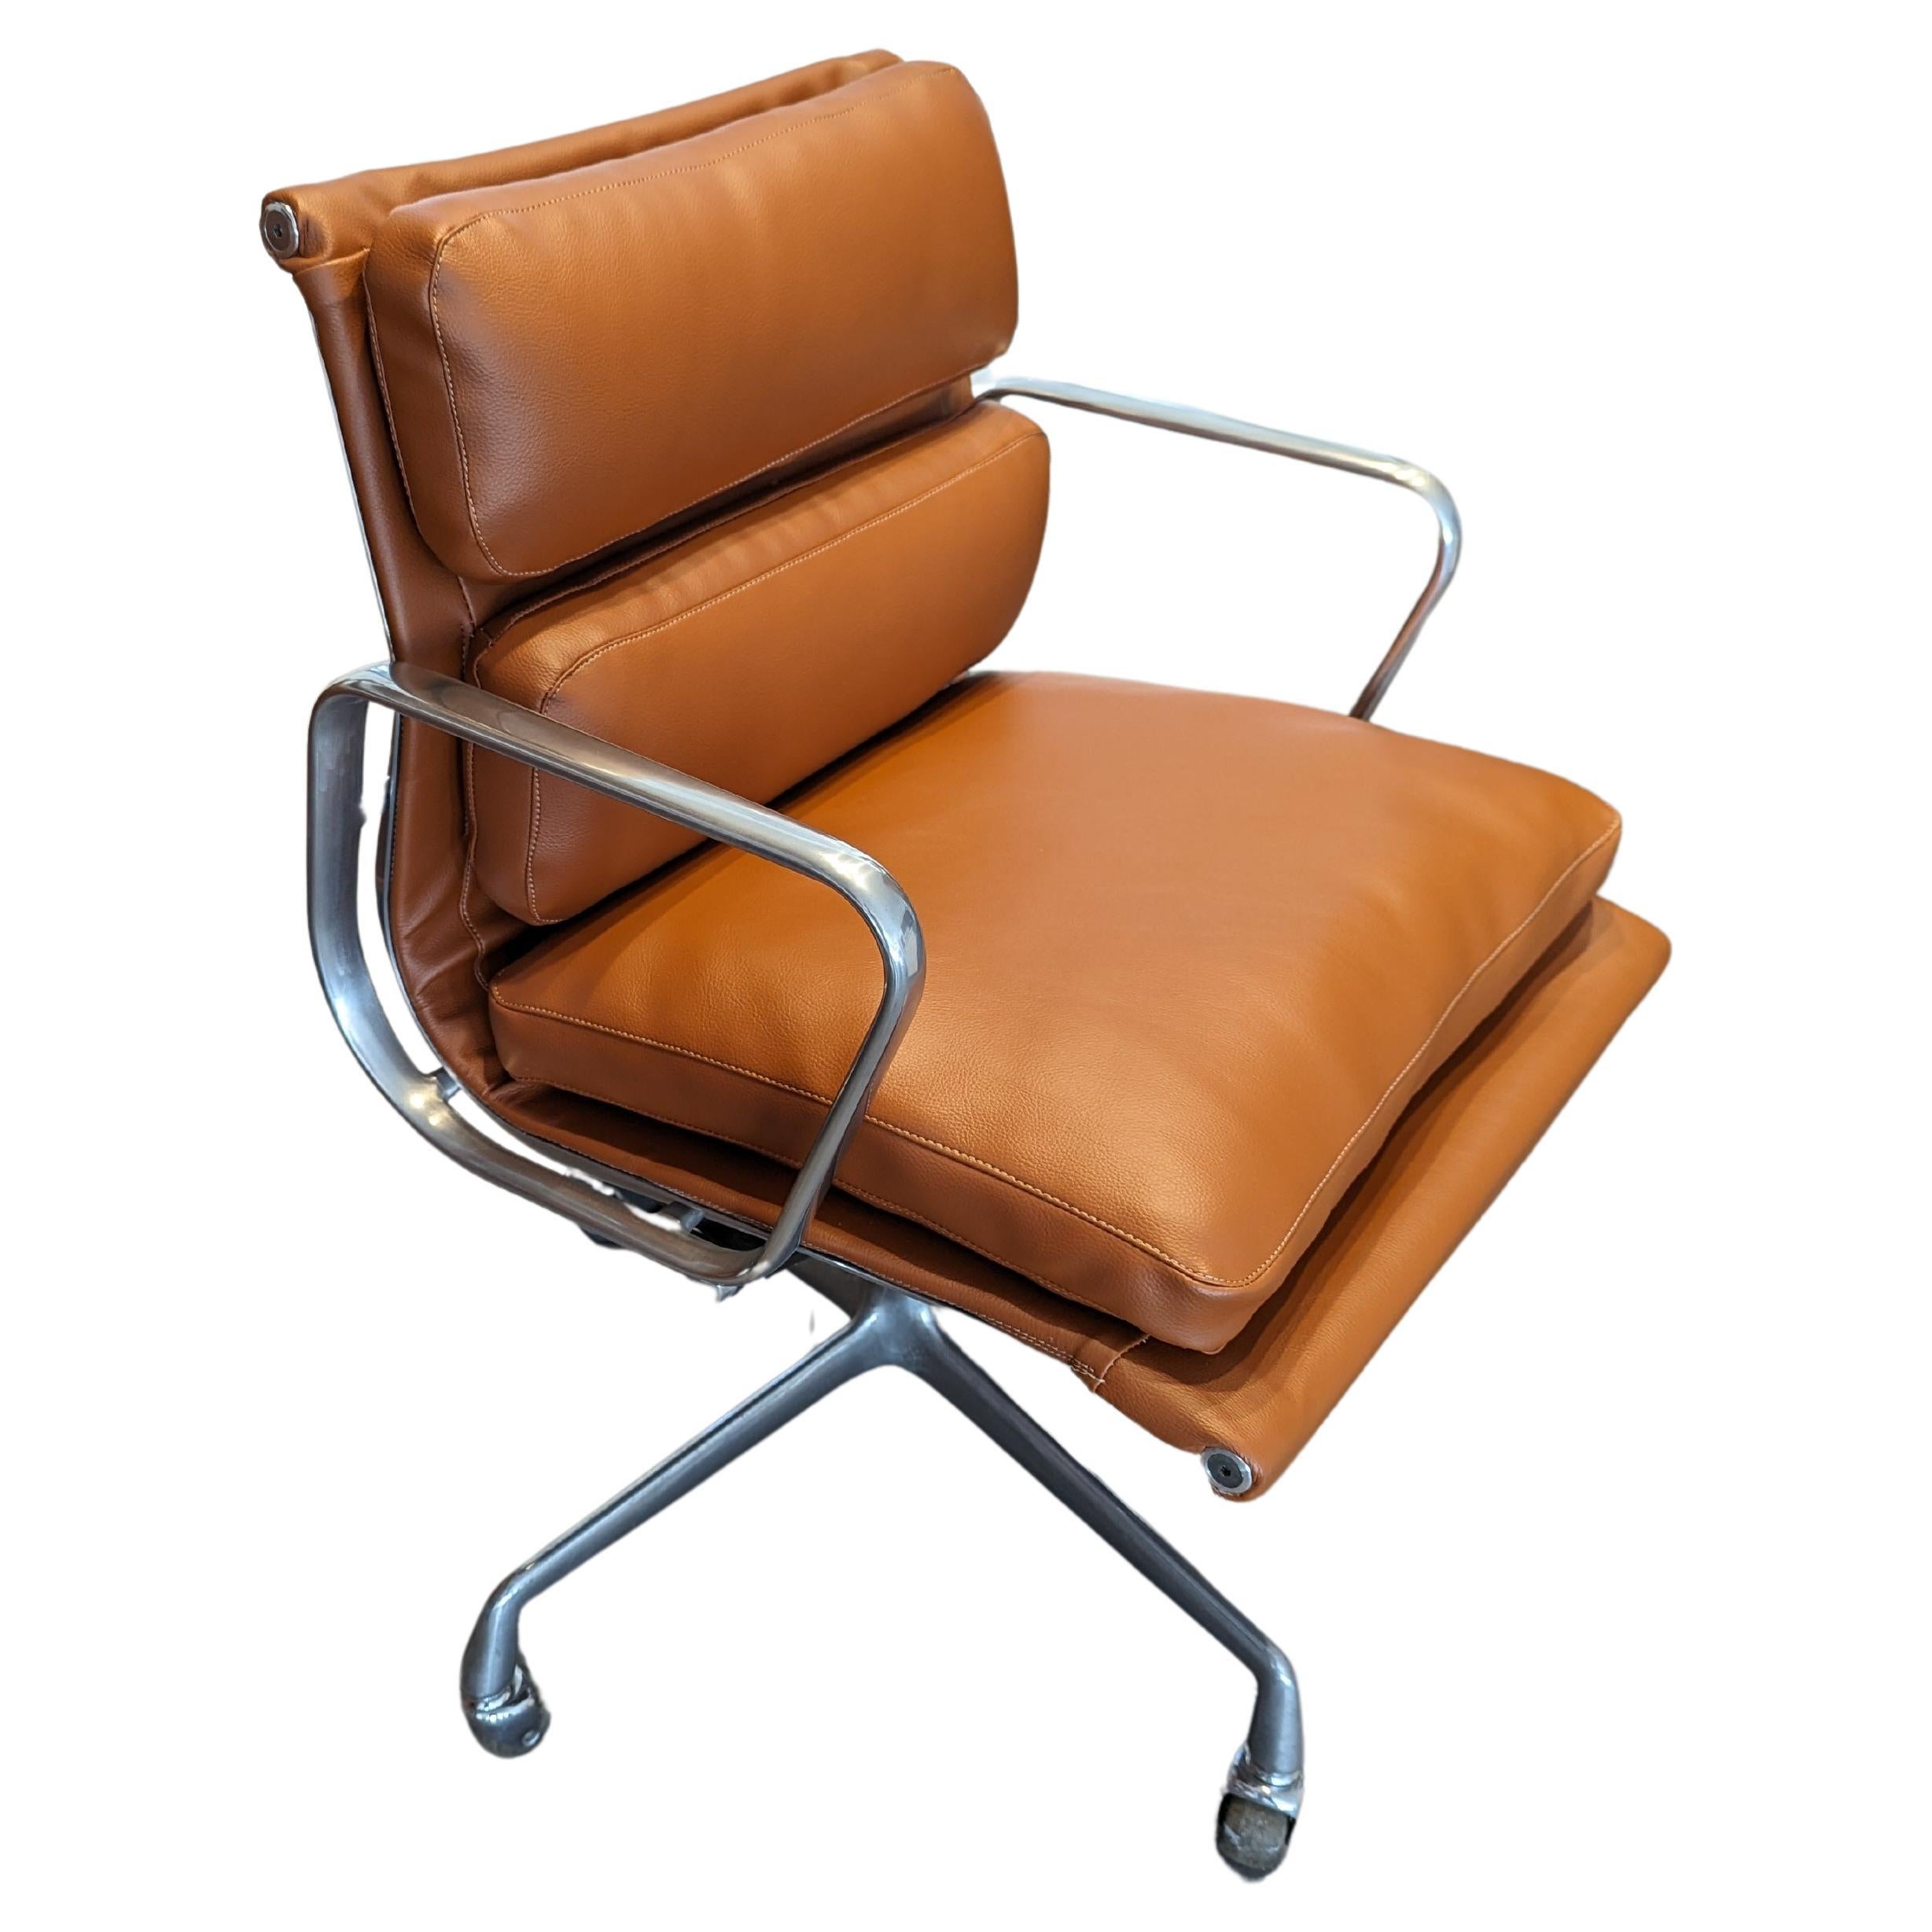 1970s Cognac Soft Pad Chair by Charles & Ray Eames for Herman Miller